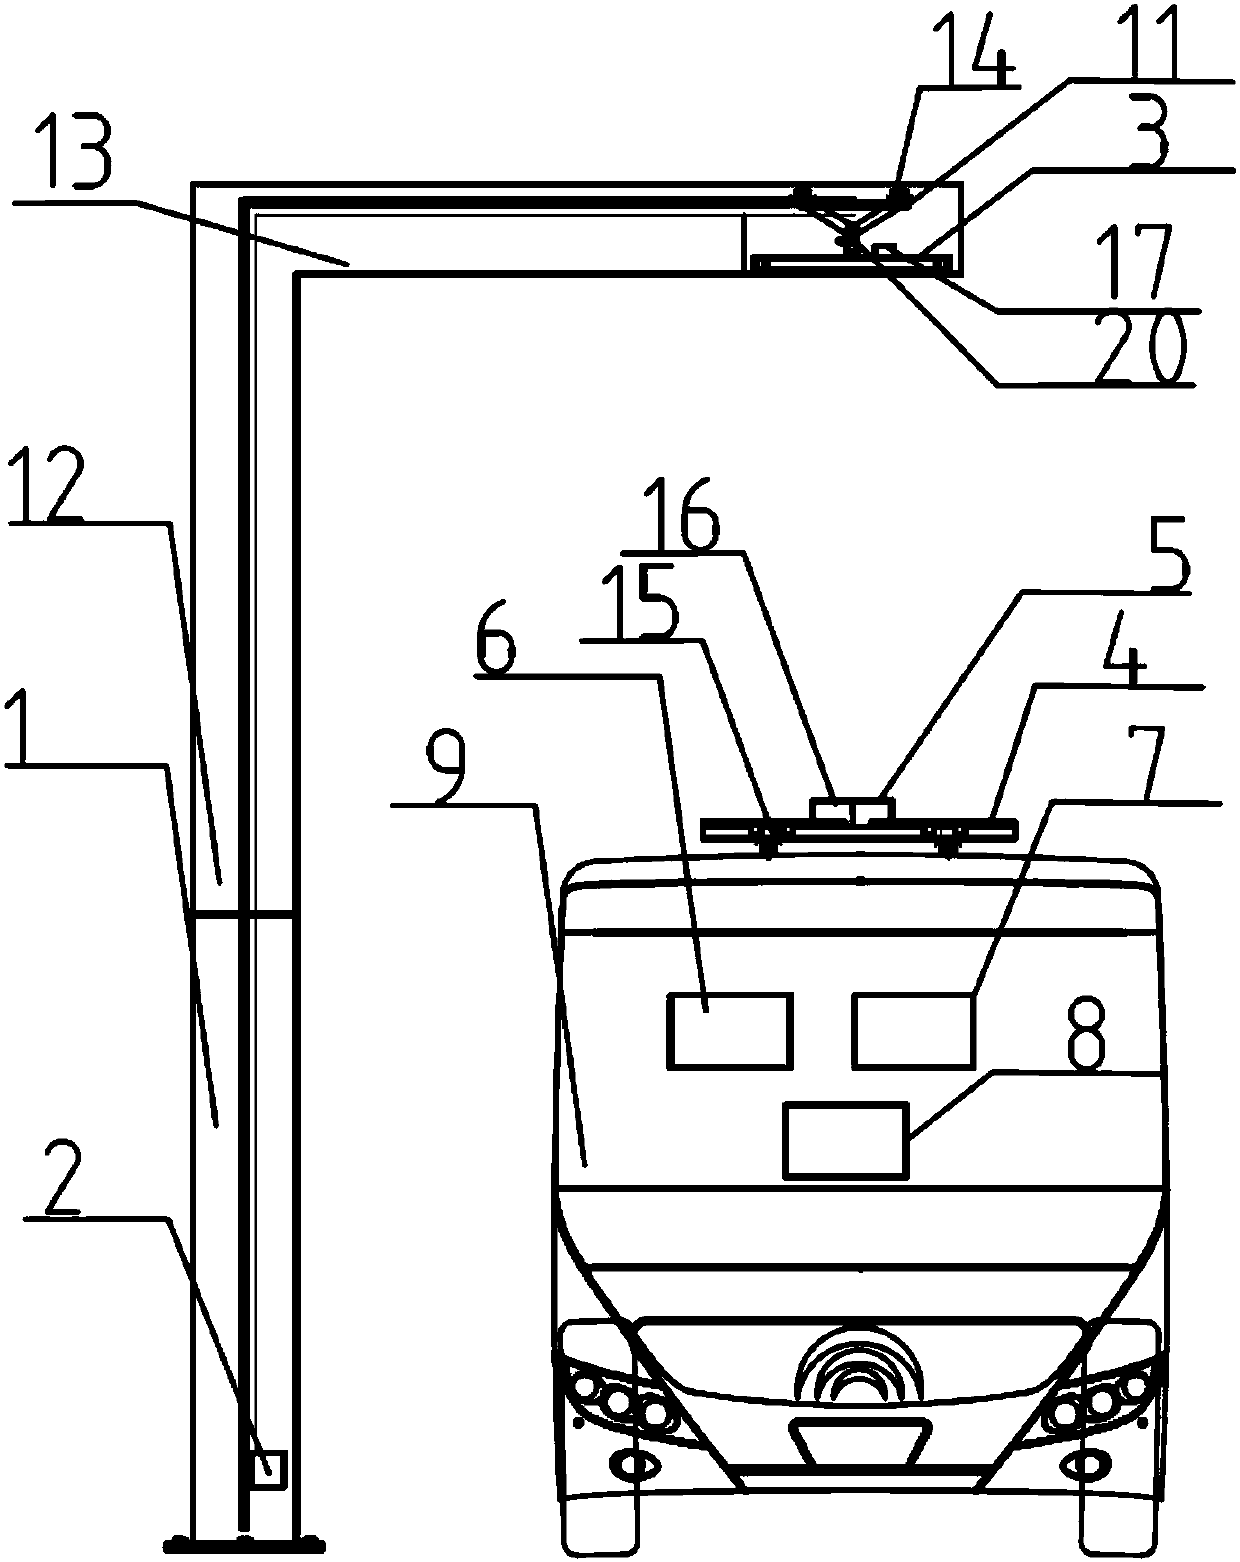 Reverse pantograph, charging system and car